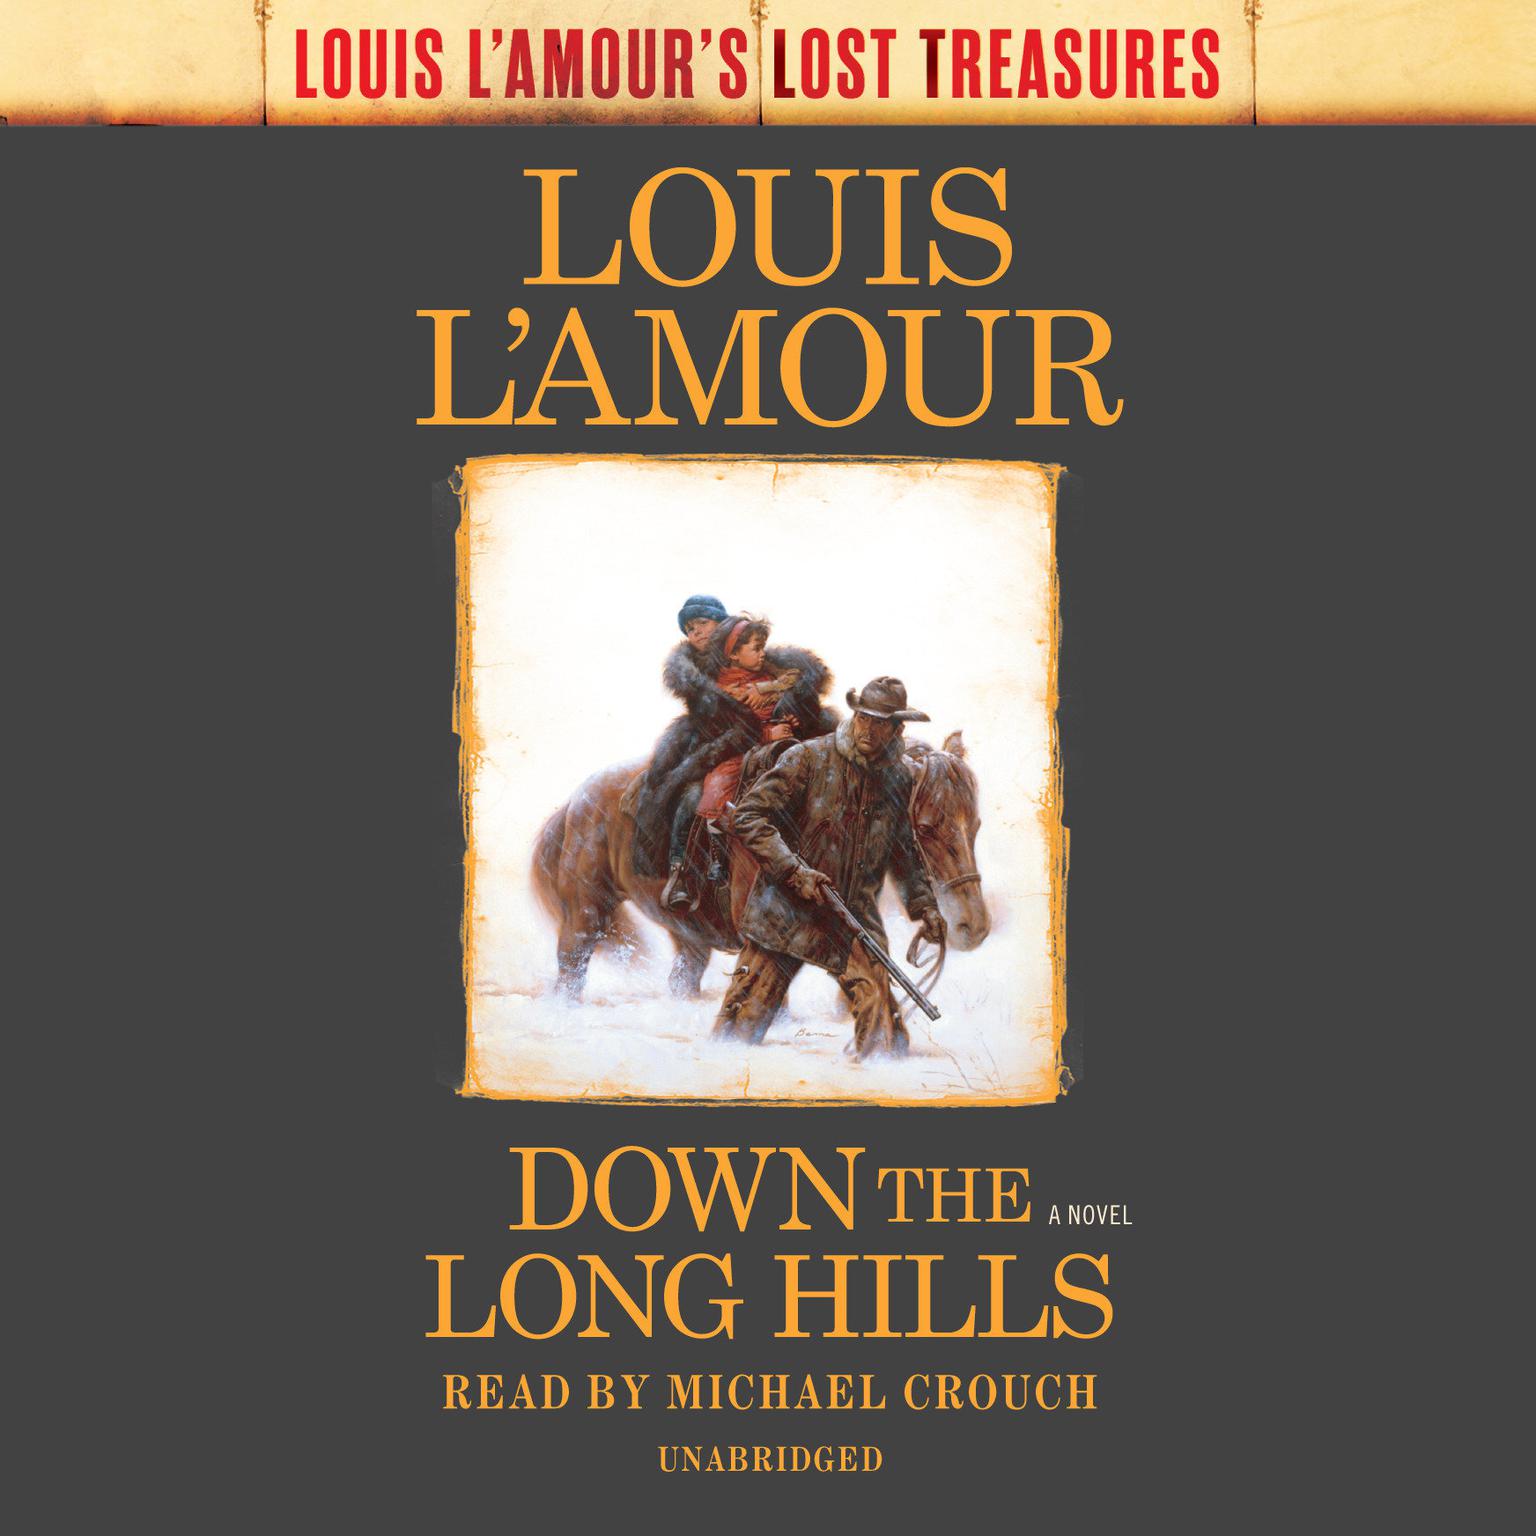 Down the Long Hills (Louis LAmours Lost Treasures): A Novel Audiobook, by Louis L’Amour